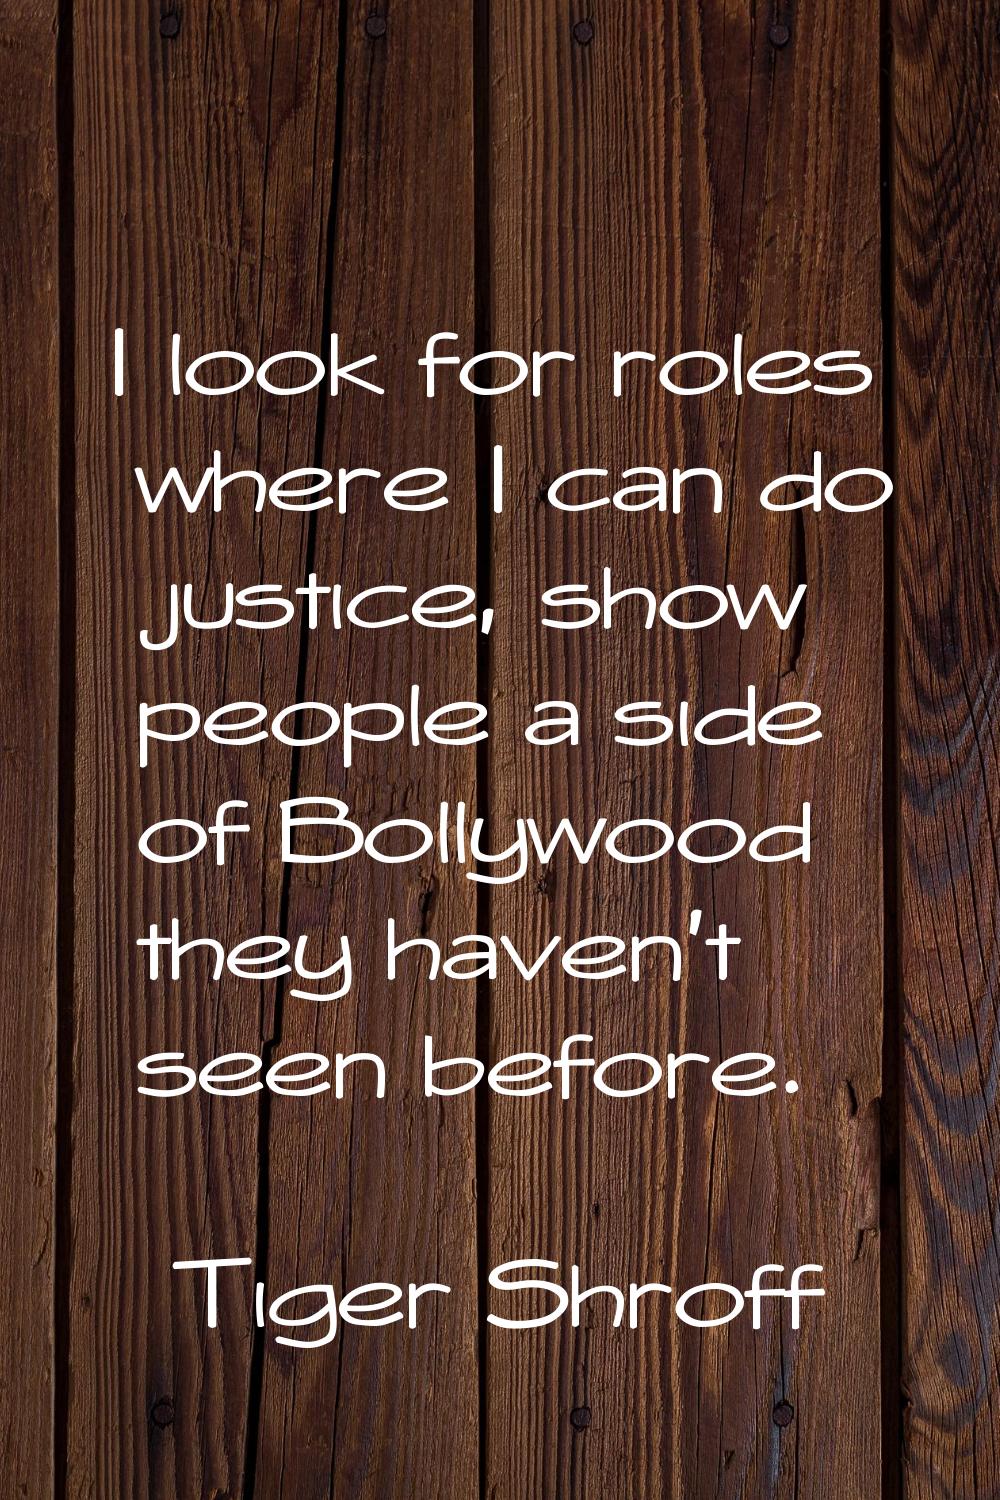 I look for roles where I can do justice, show people a side of Bollywood they haven't seen before.